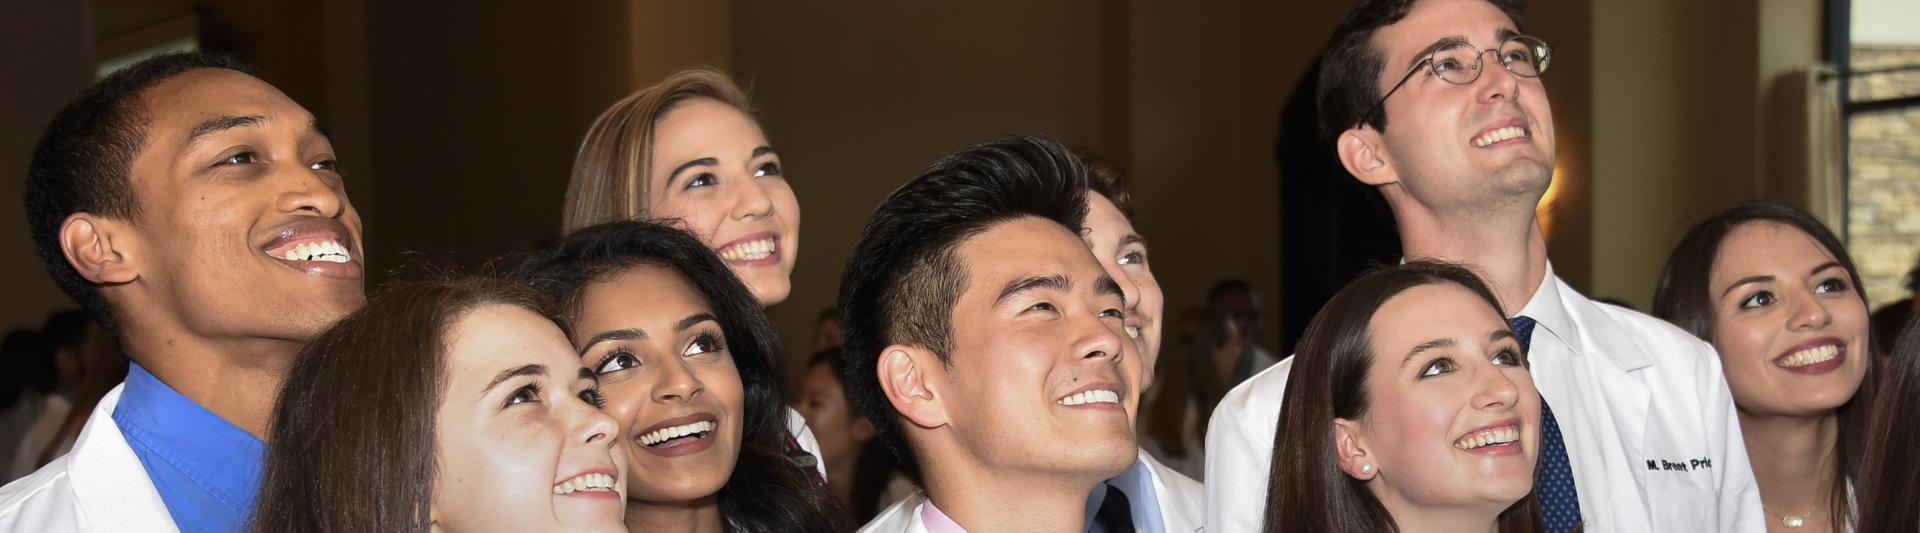 Students celebrating at their White Coat Ceremony